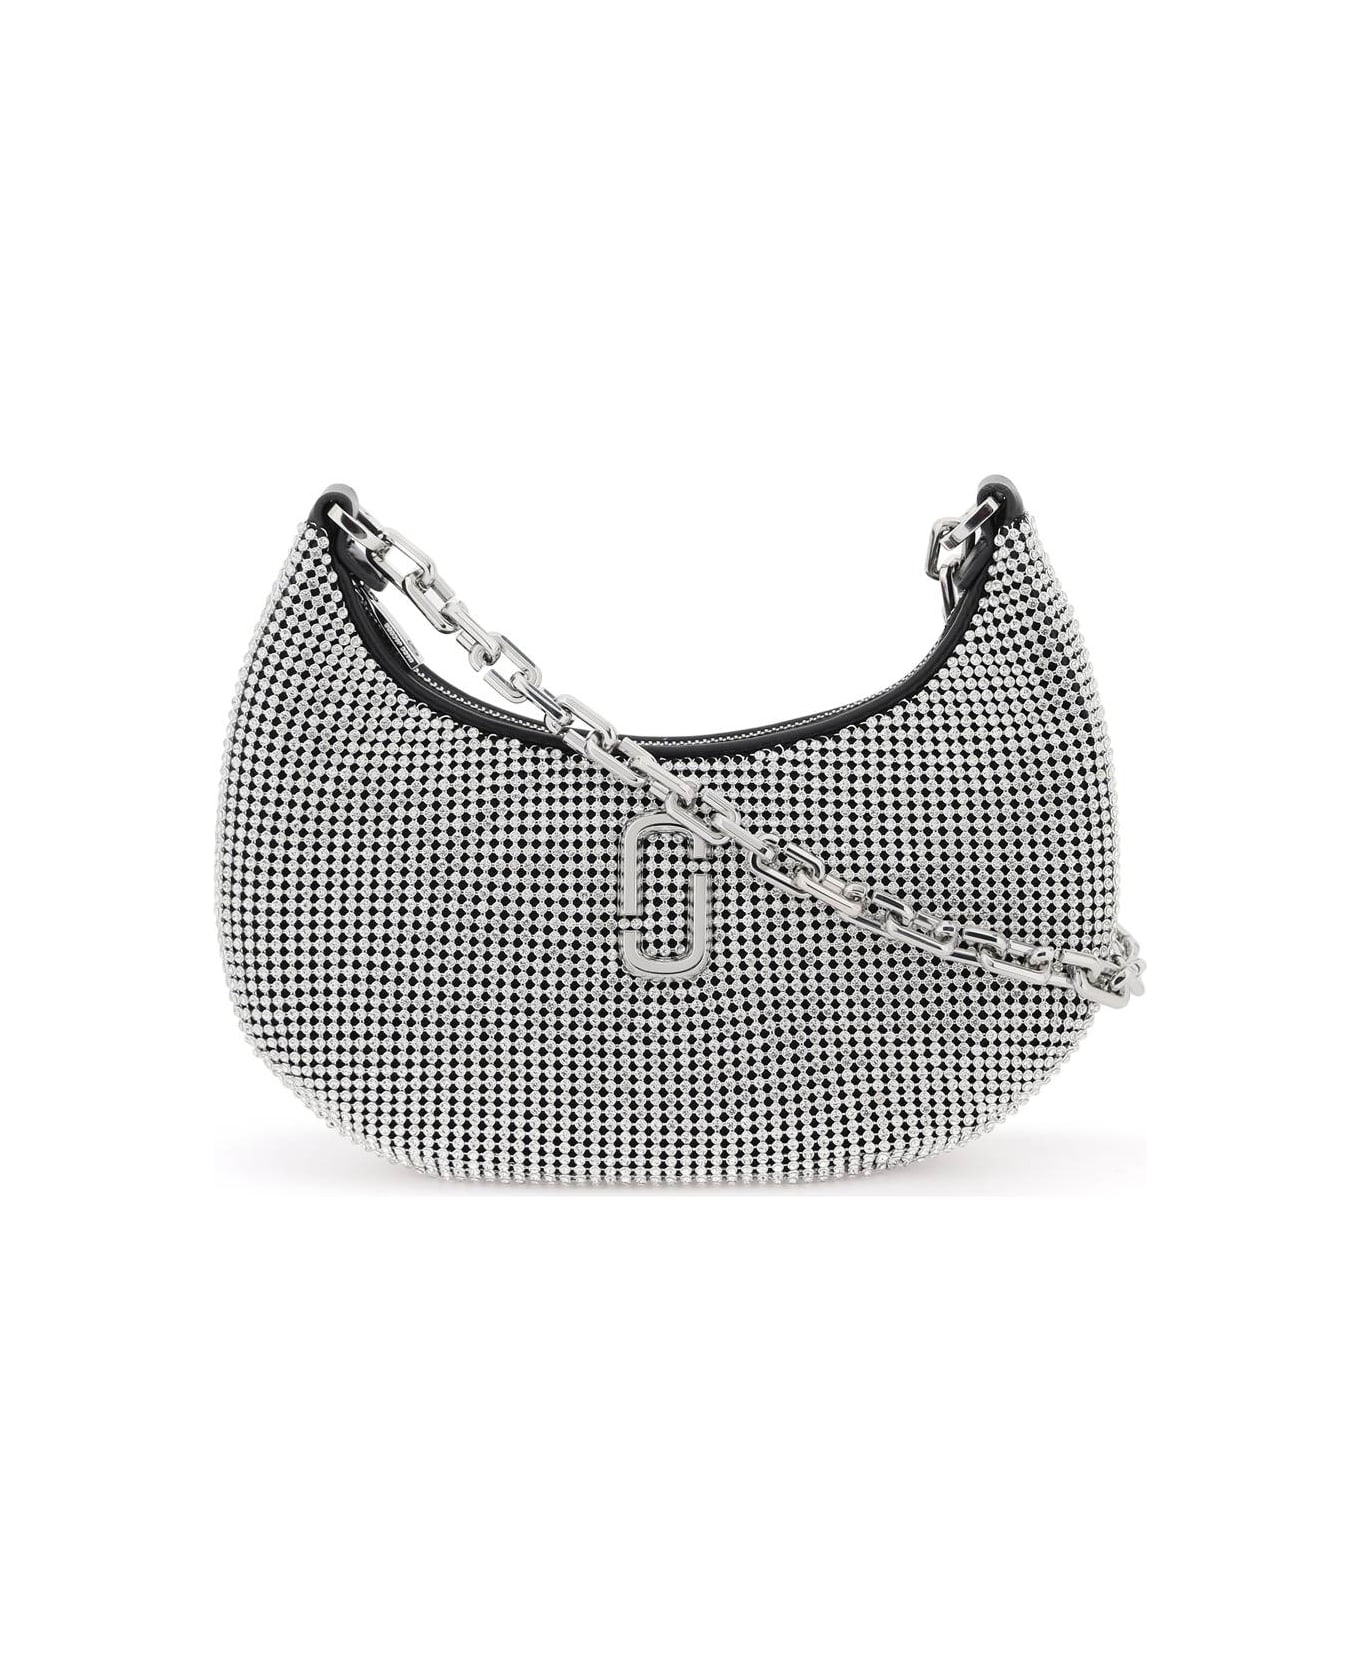 Marc Jacobs The Rhinestone Small Curve Shoulder Bag - CRYSTALS